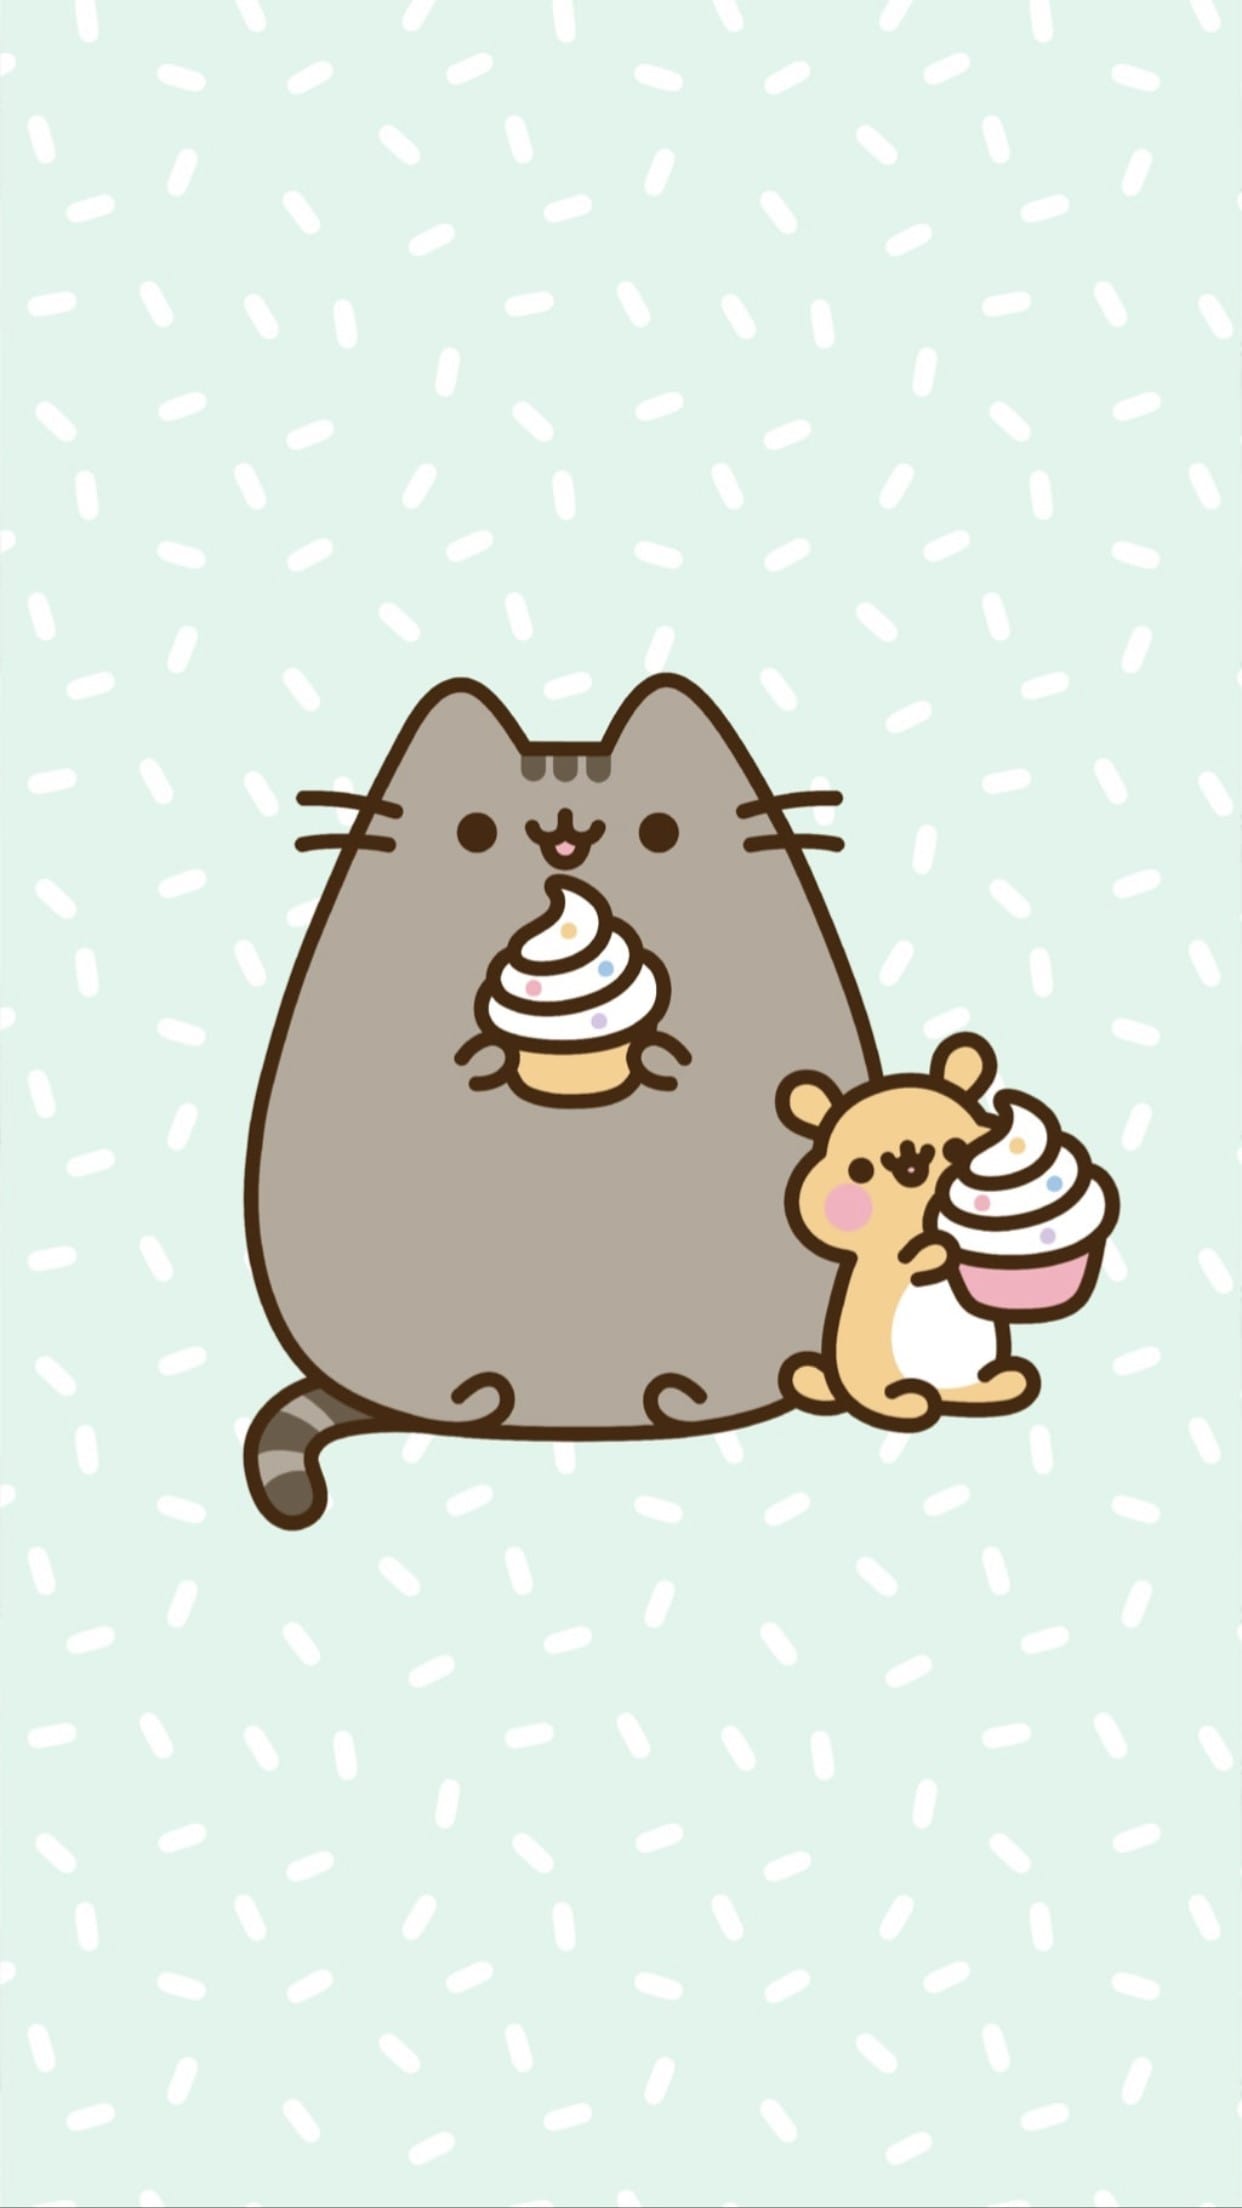 Pusheen Cat Wallpapers Hd New Tab Themes Backgrounds My Xxx Hot Girl